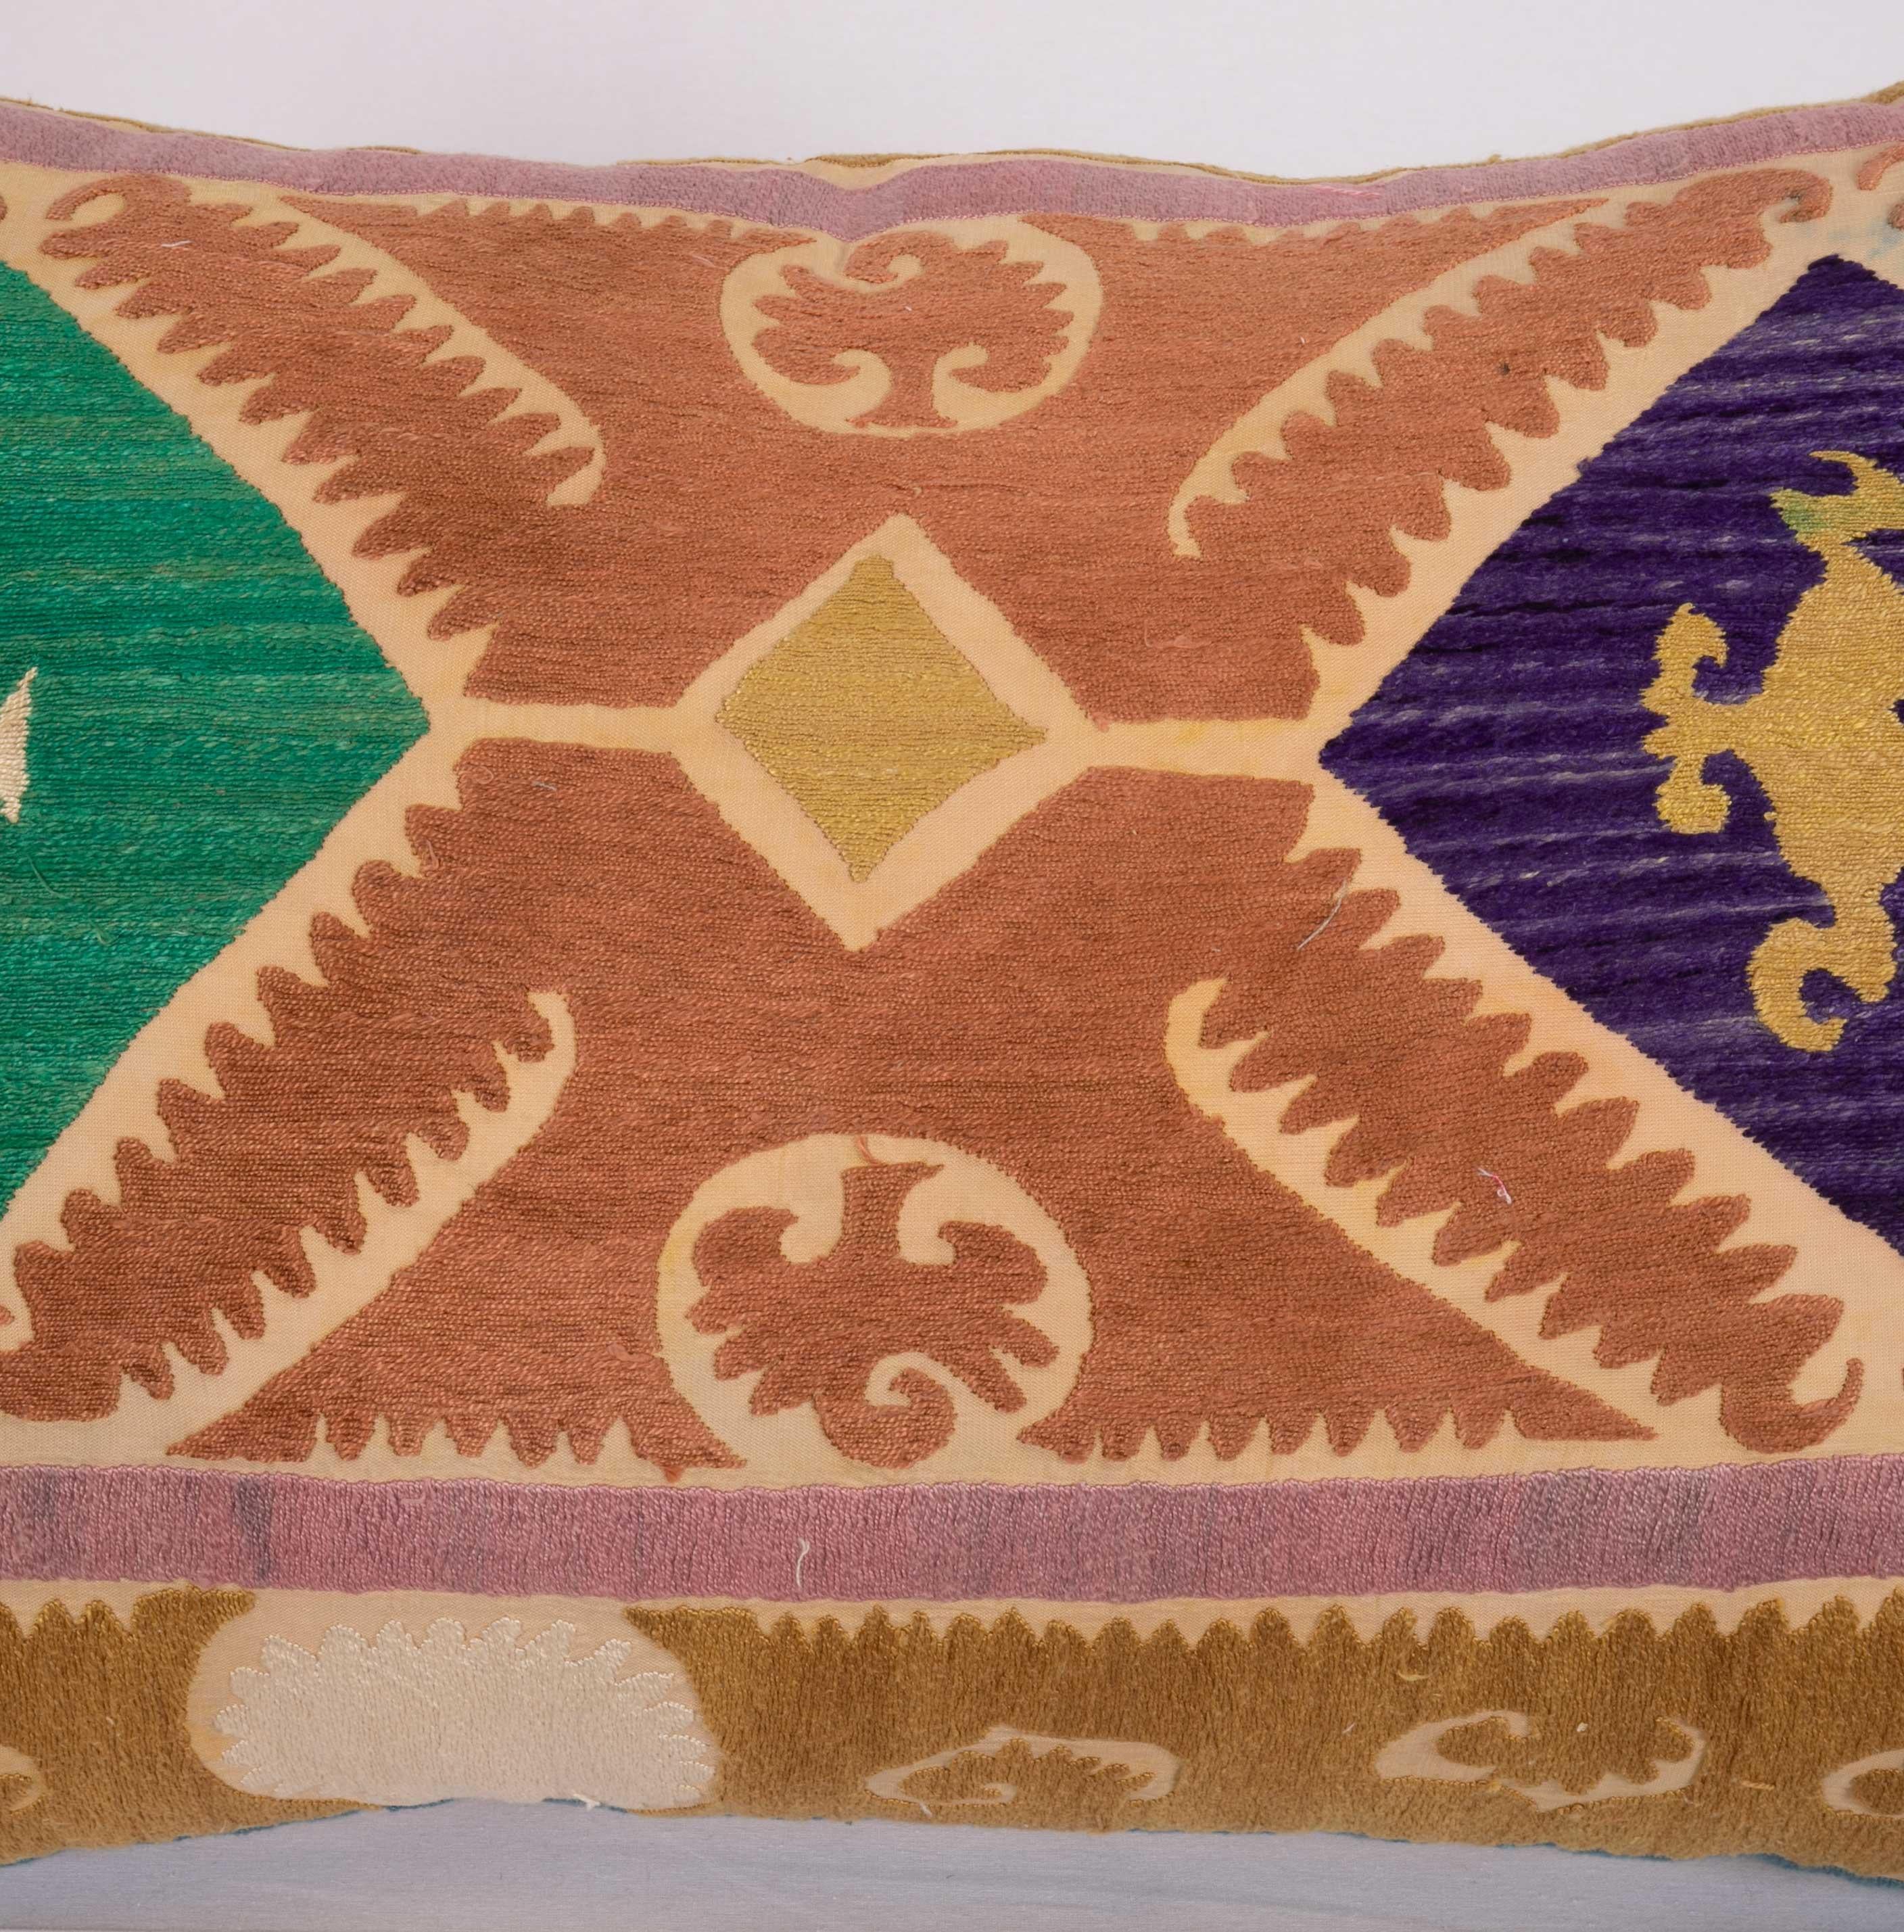 Embroidered Suzani Pillow Case Made from a Vintage Uzbek Suzani, Mid-20th Century